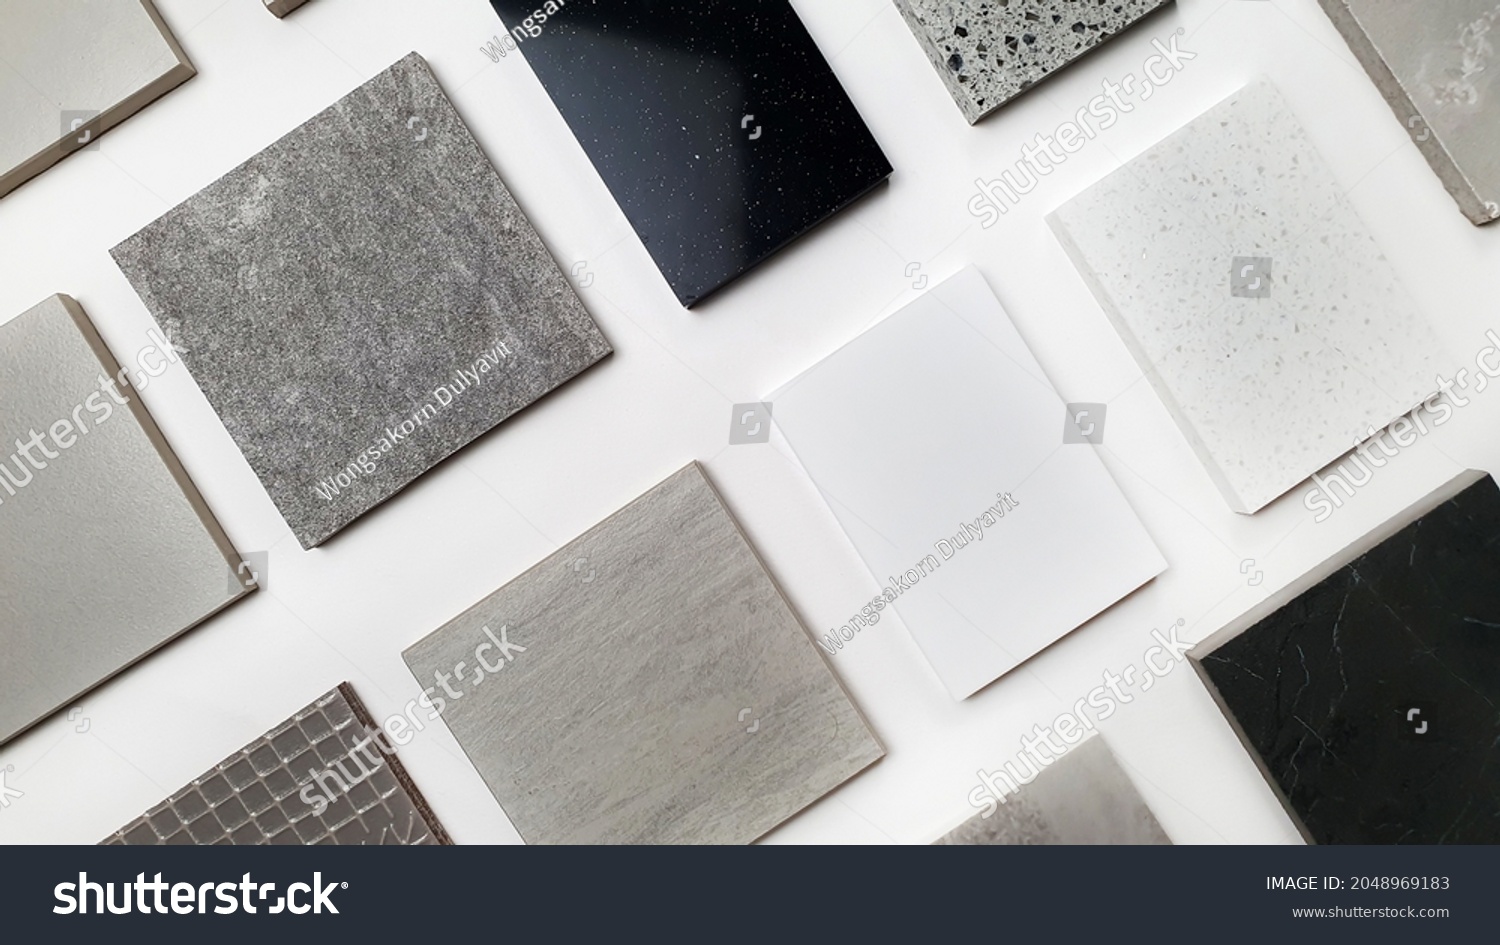 samples of interior stone material consists concrete tiles, quartz stones, artificial stones, graphic tile. top view of interior selected material for mood and tone board. interior materials palette. #2048969183